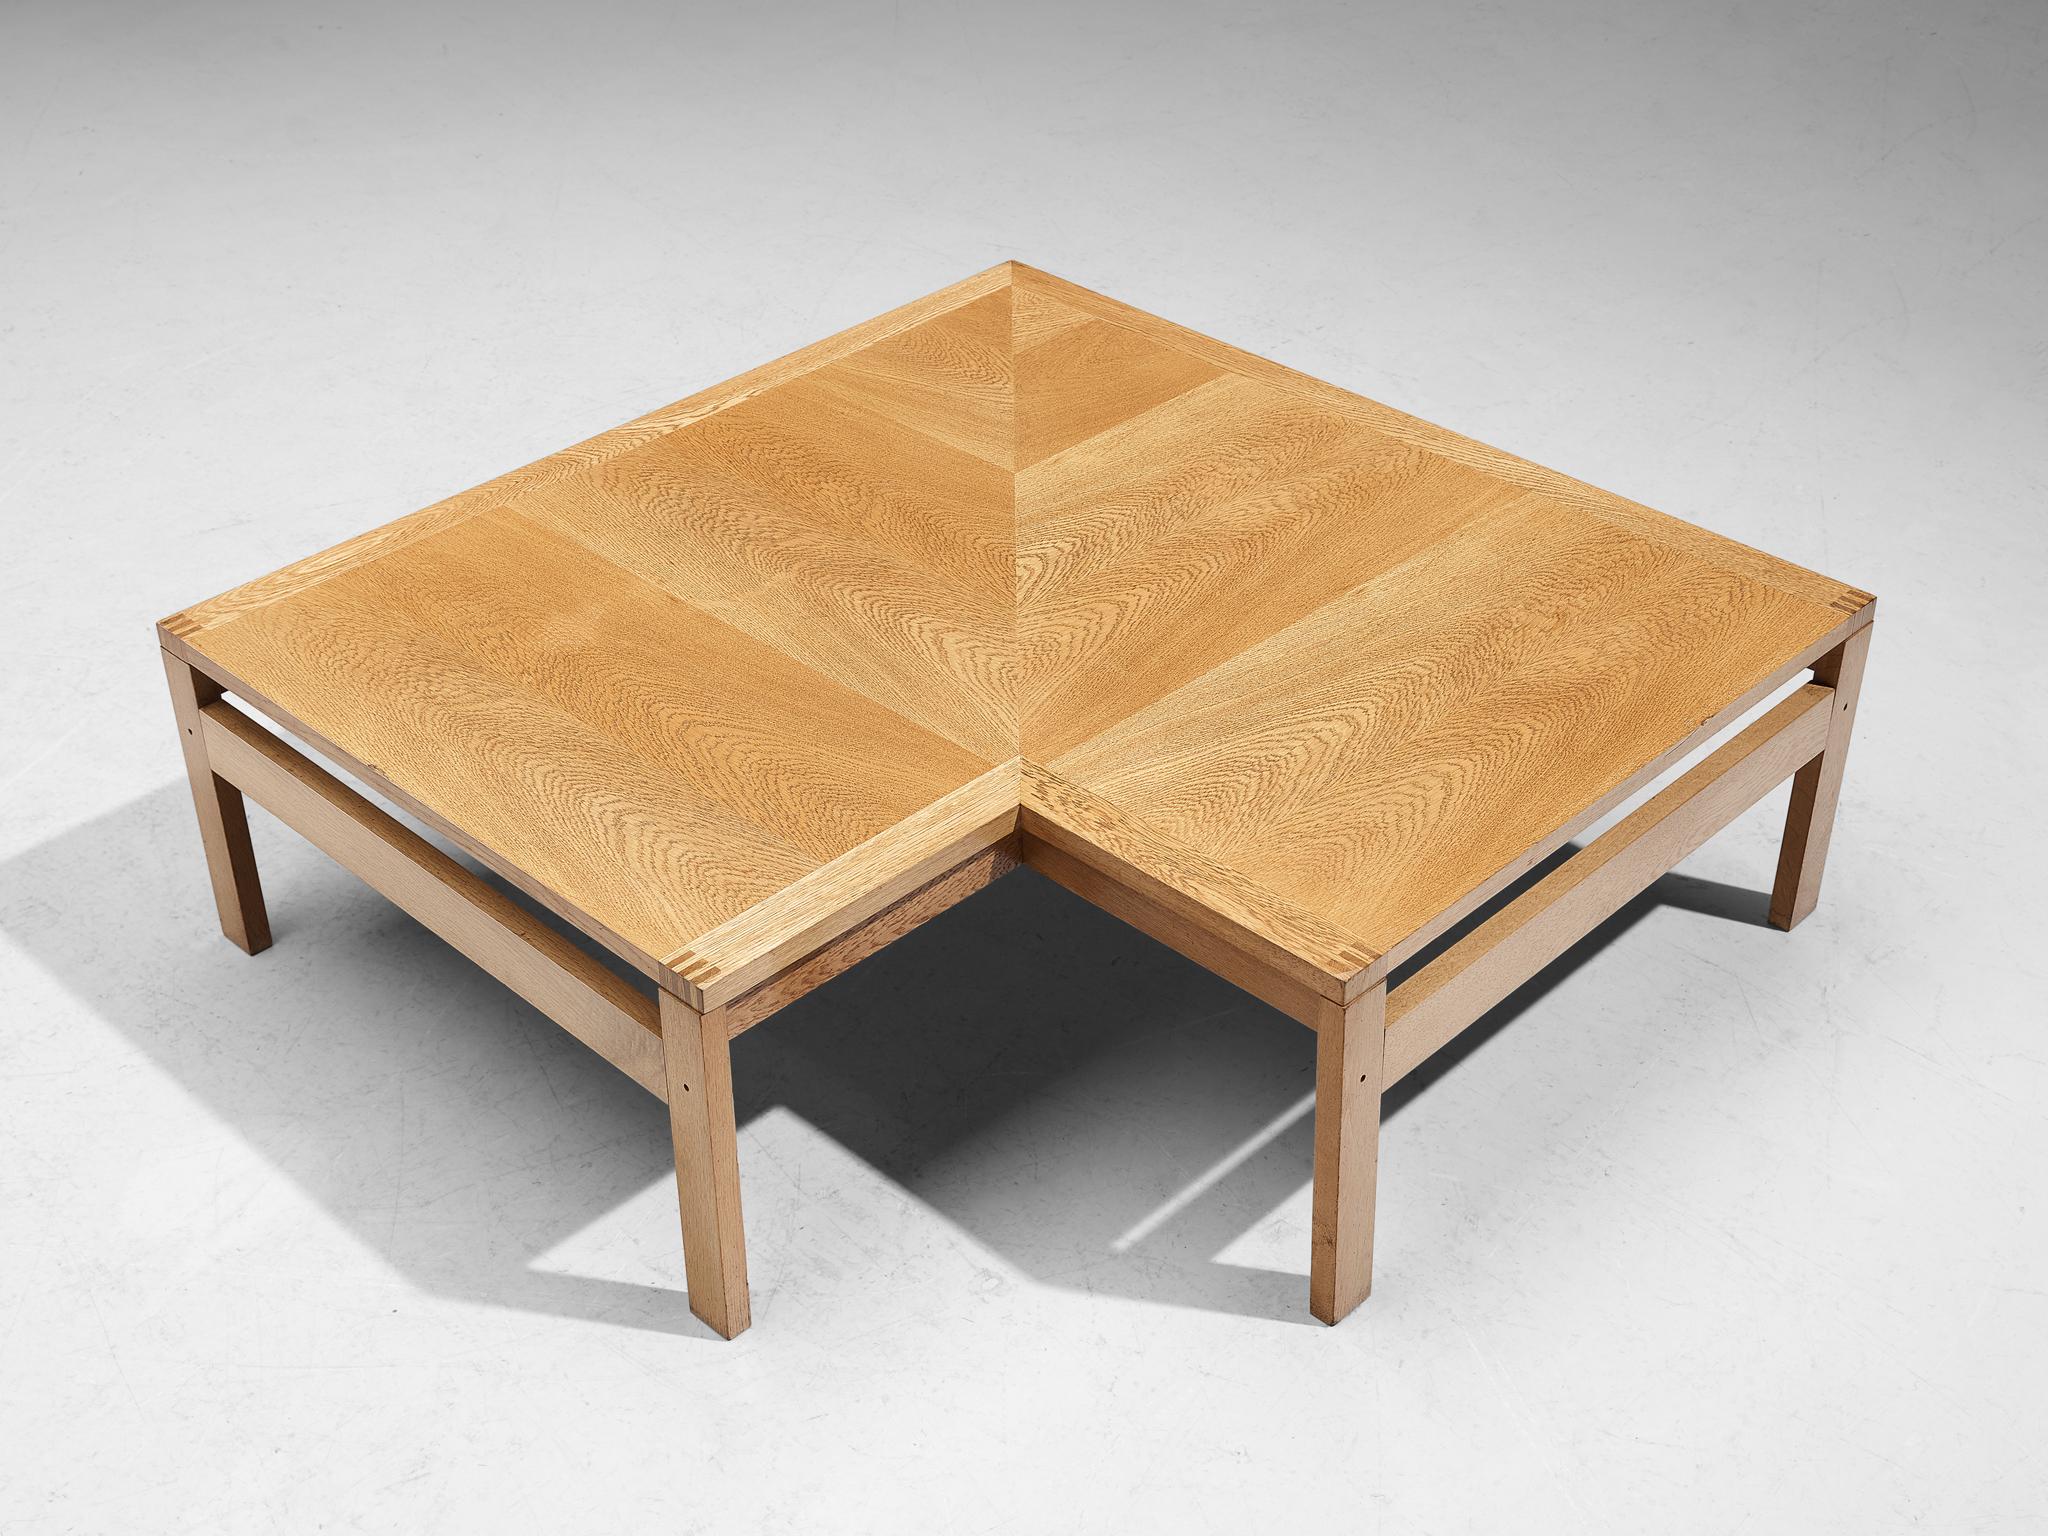 Ole Gjerløv-Knudsen and Torben Lind for France & Søn, corner coffee table or side table, oak, Denmark, 1960s

This corner coffee table is well-constructed in a precise manner implementing straight lines, resulting in an eloquent and simplistic